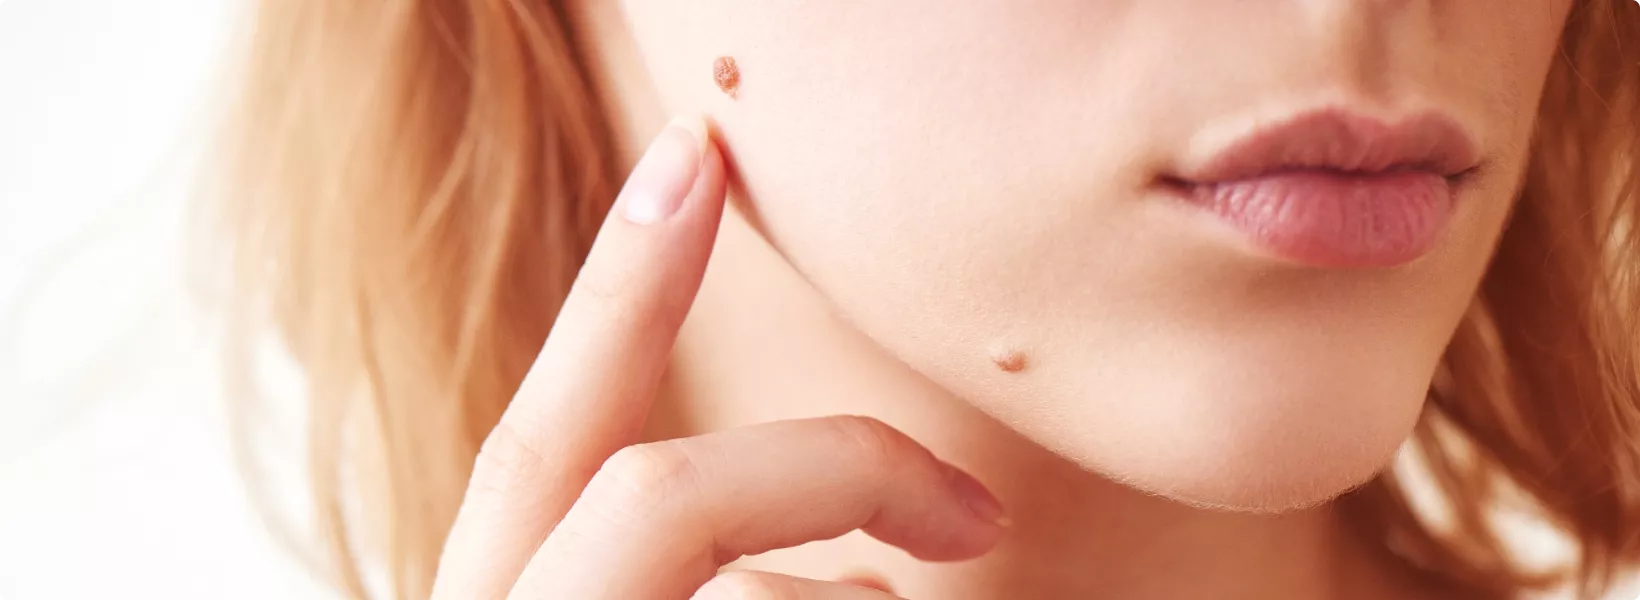 woman with moles